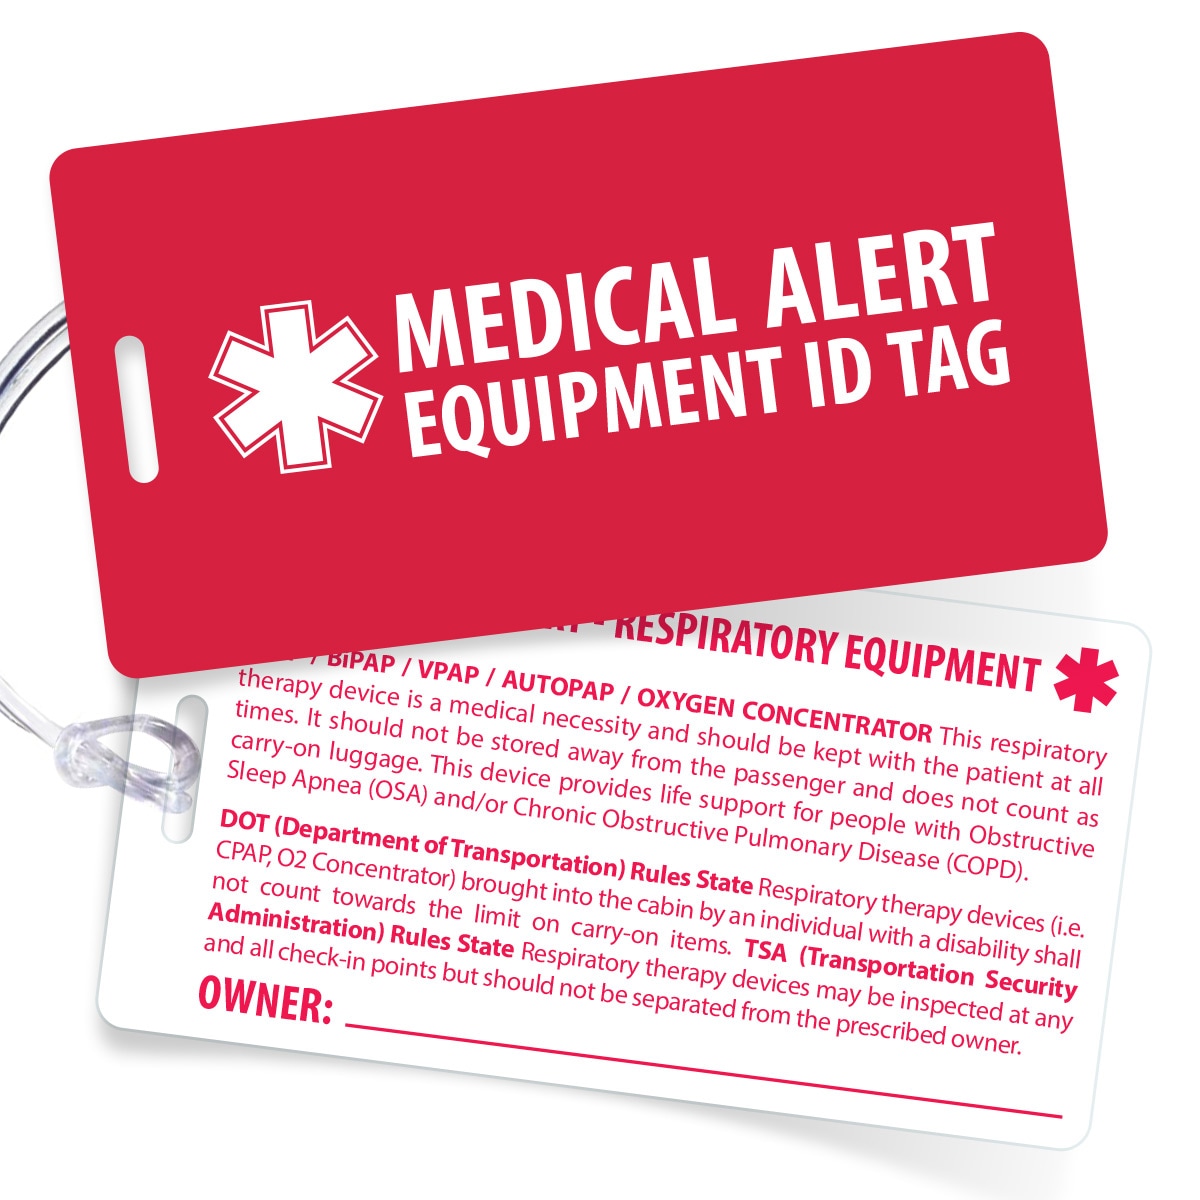 Personal Oxygen Medical Alert Equipment Luggage TSA Tag Handle with Care 1 DOT and ACAA regulations MELT-120 Quantity 